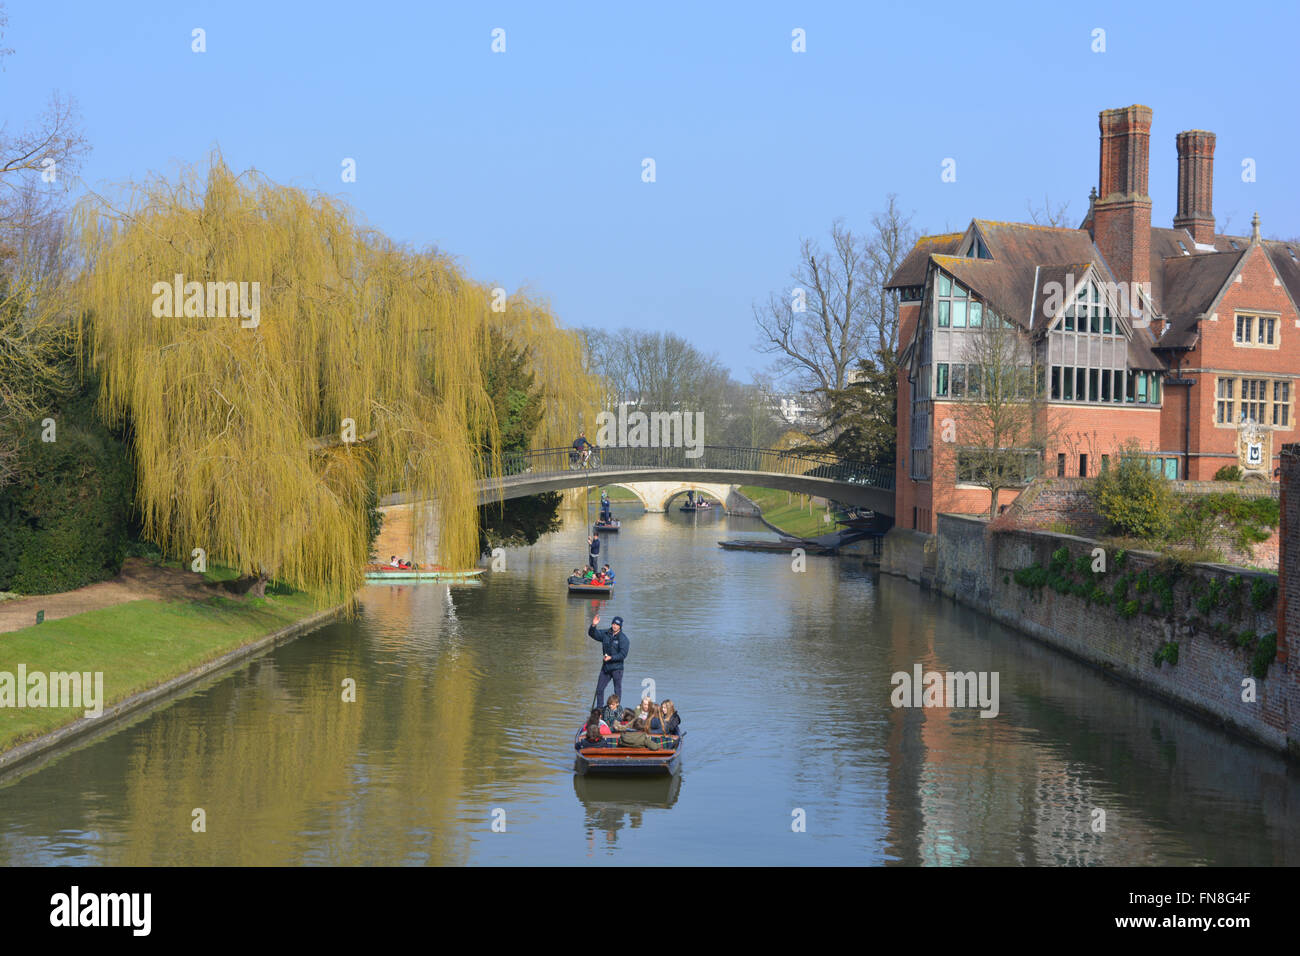 Punting on the River Cam, looking towards Trinity Hall College and The Jerwood Library on the right. University of Cambridge, UK Stock Photo